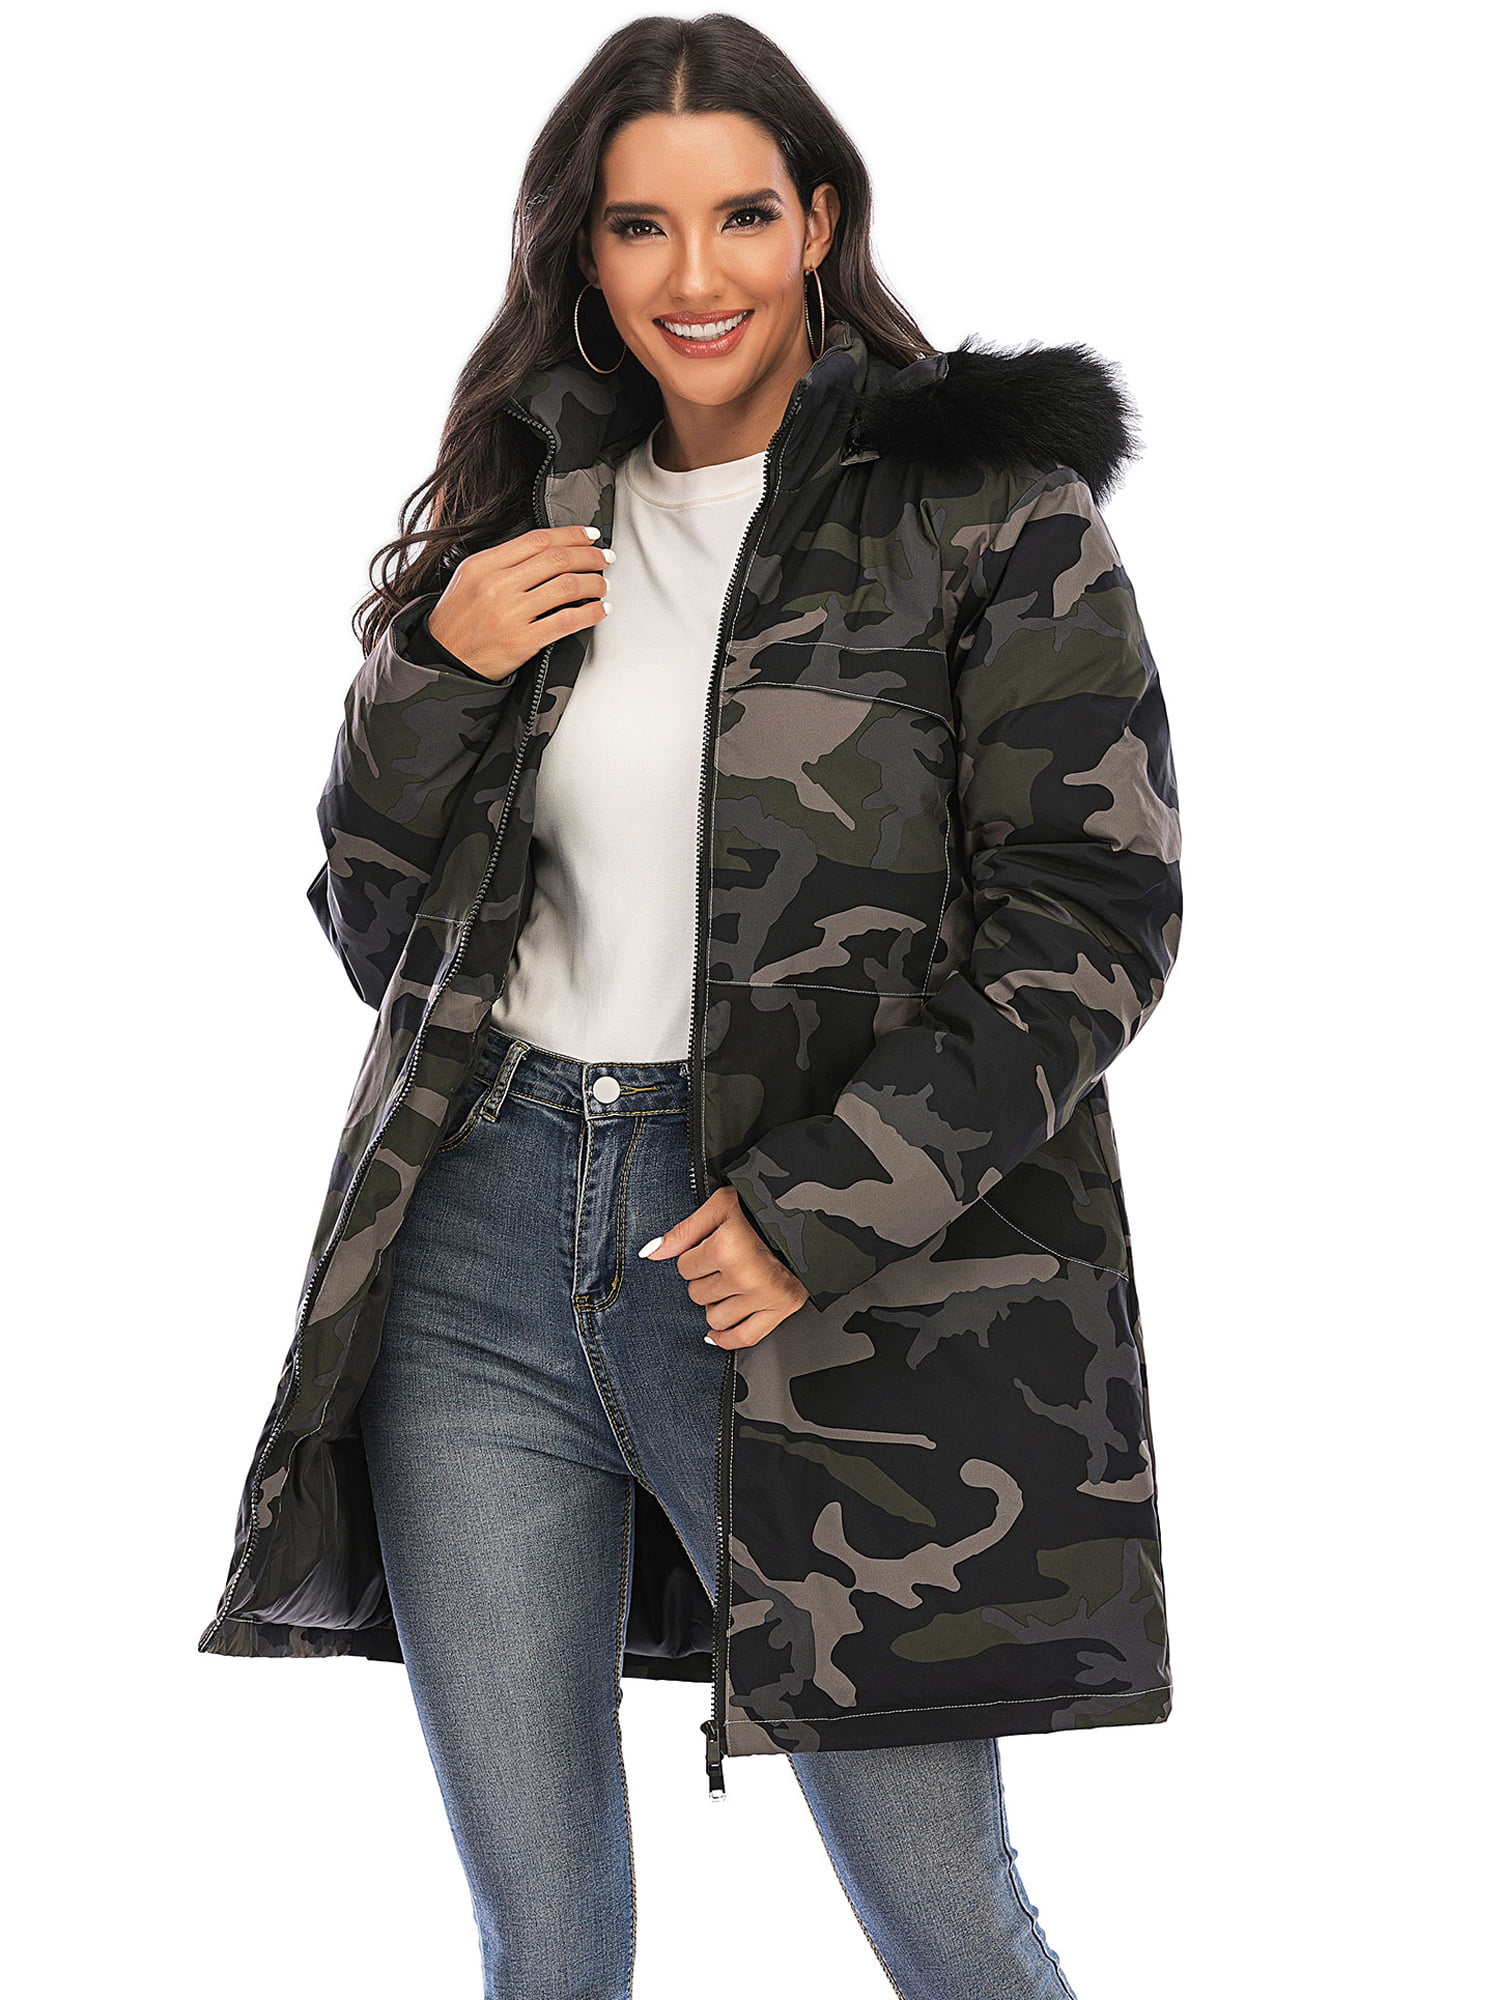 Trench Coats for Women Plus Size,Womens Winter Casual Hoodie Zipper Asymmetric Solid Quilted Coat Overcoat